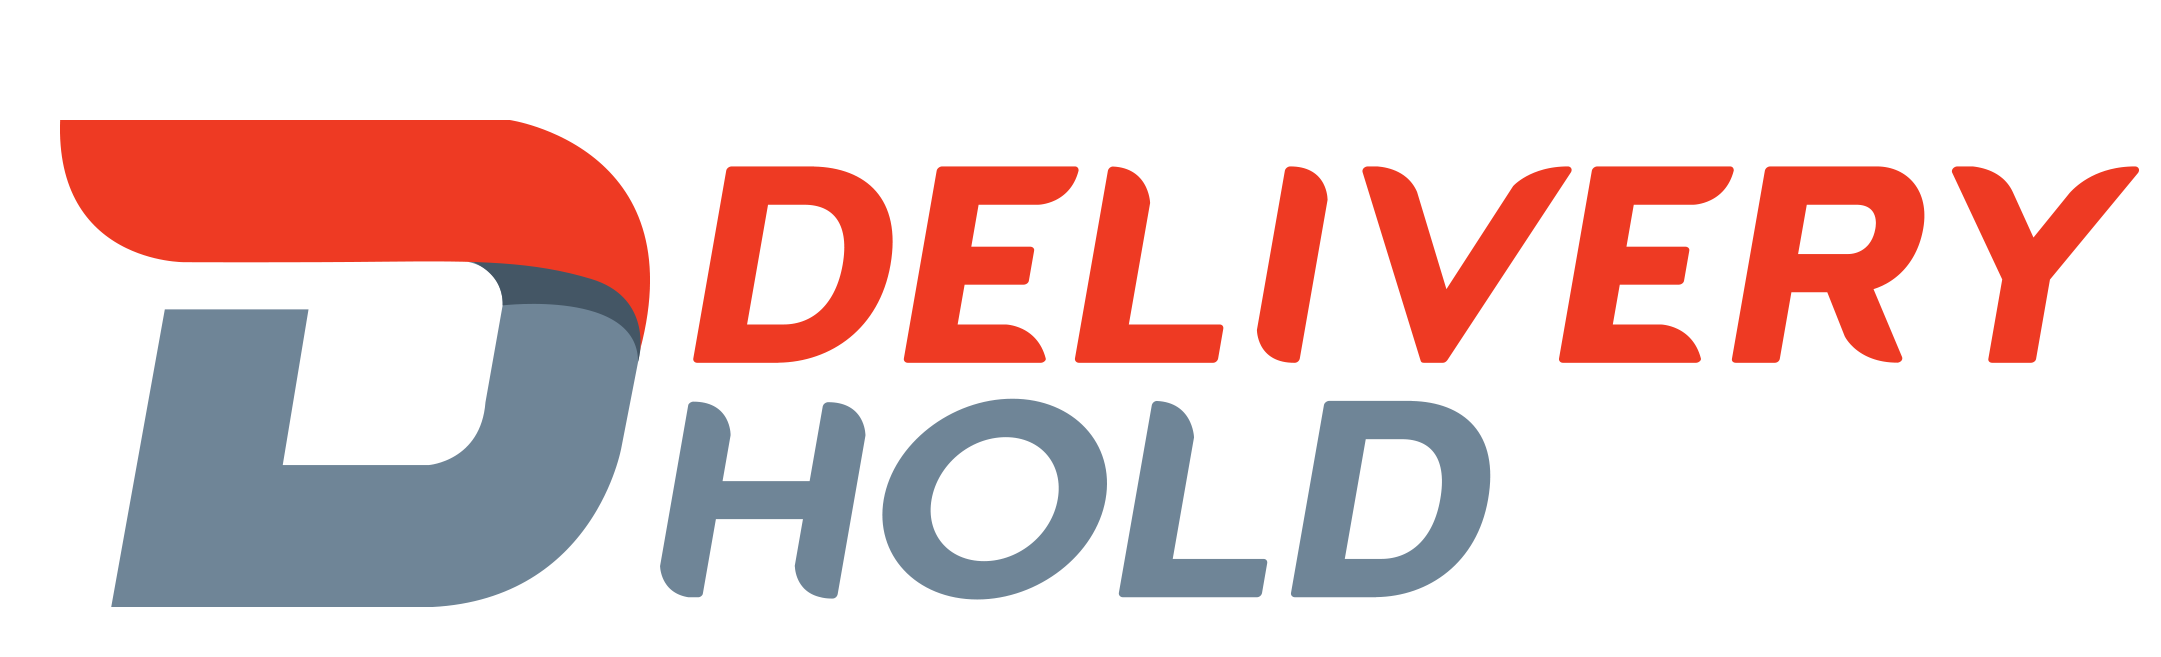 Delivery Hold